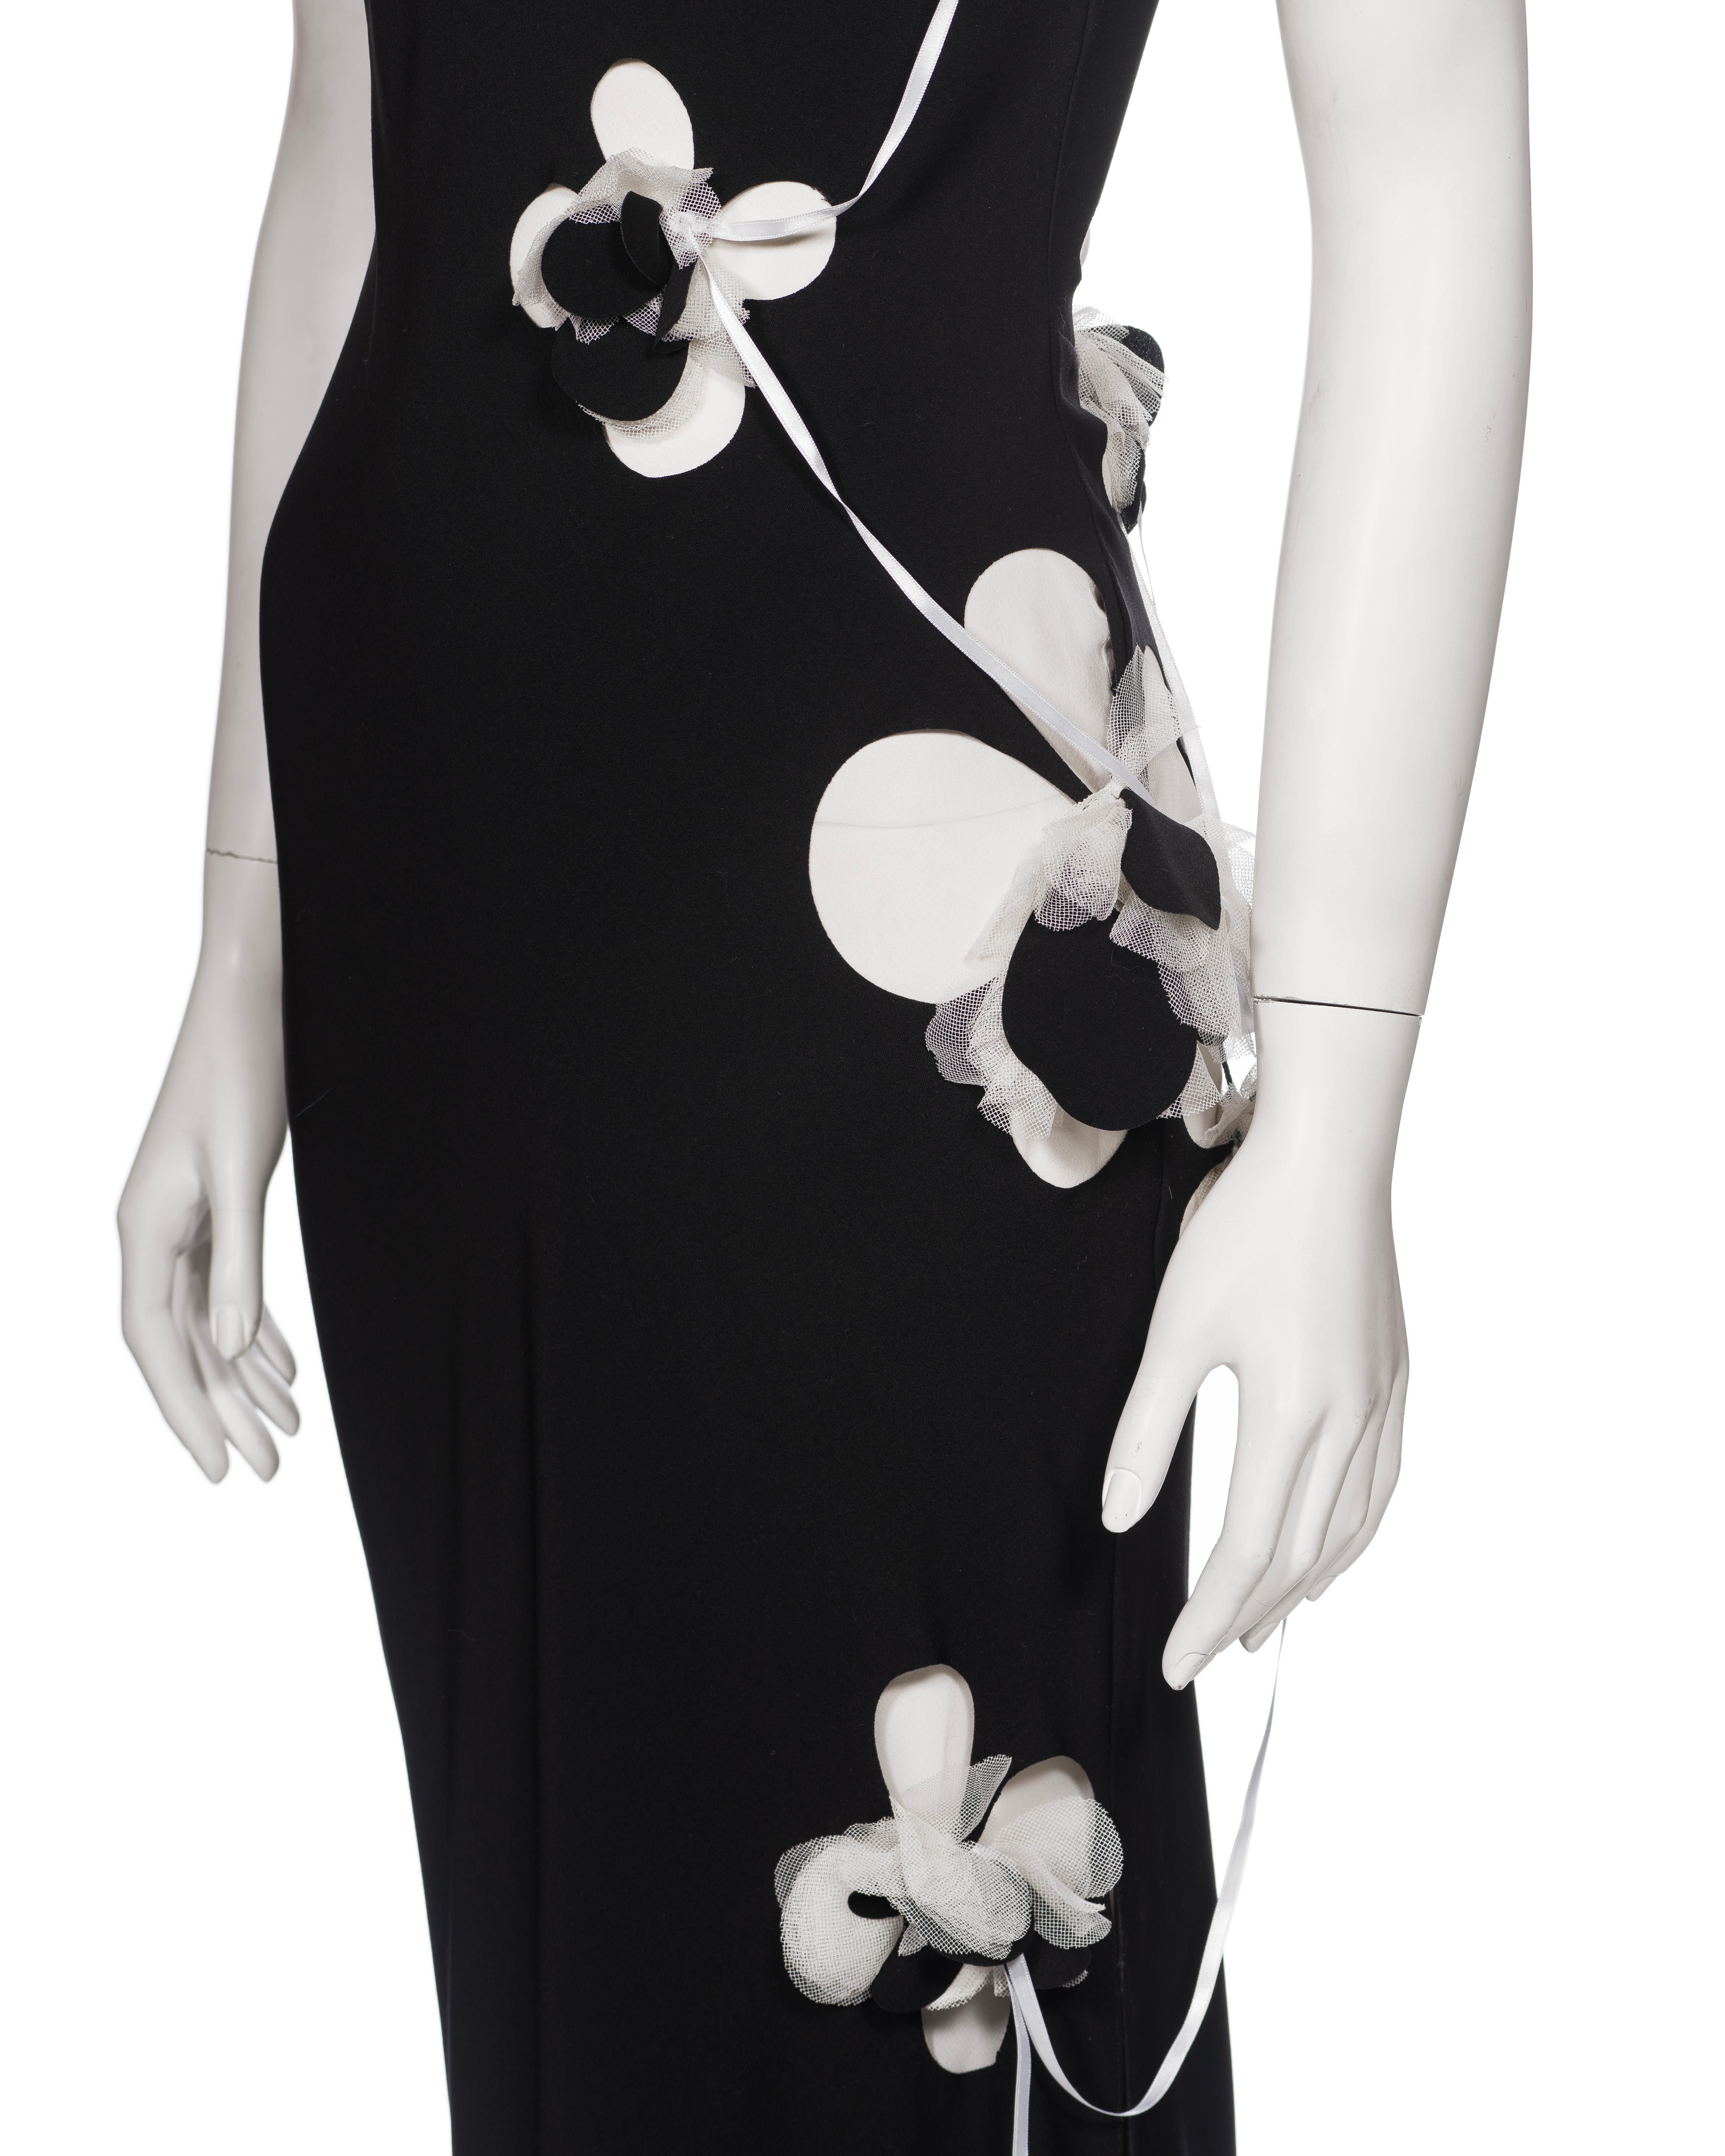 John Galliano Black Silk Slip Dress with Floral Appliqués and Ribbons, FW 2001 For Sale 2